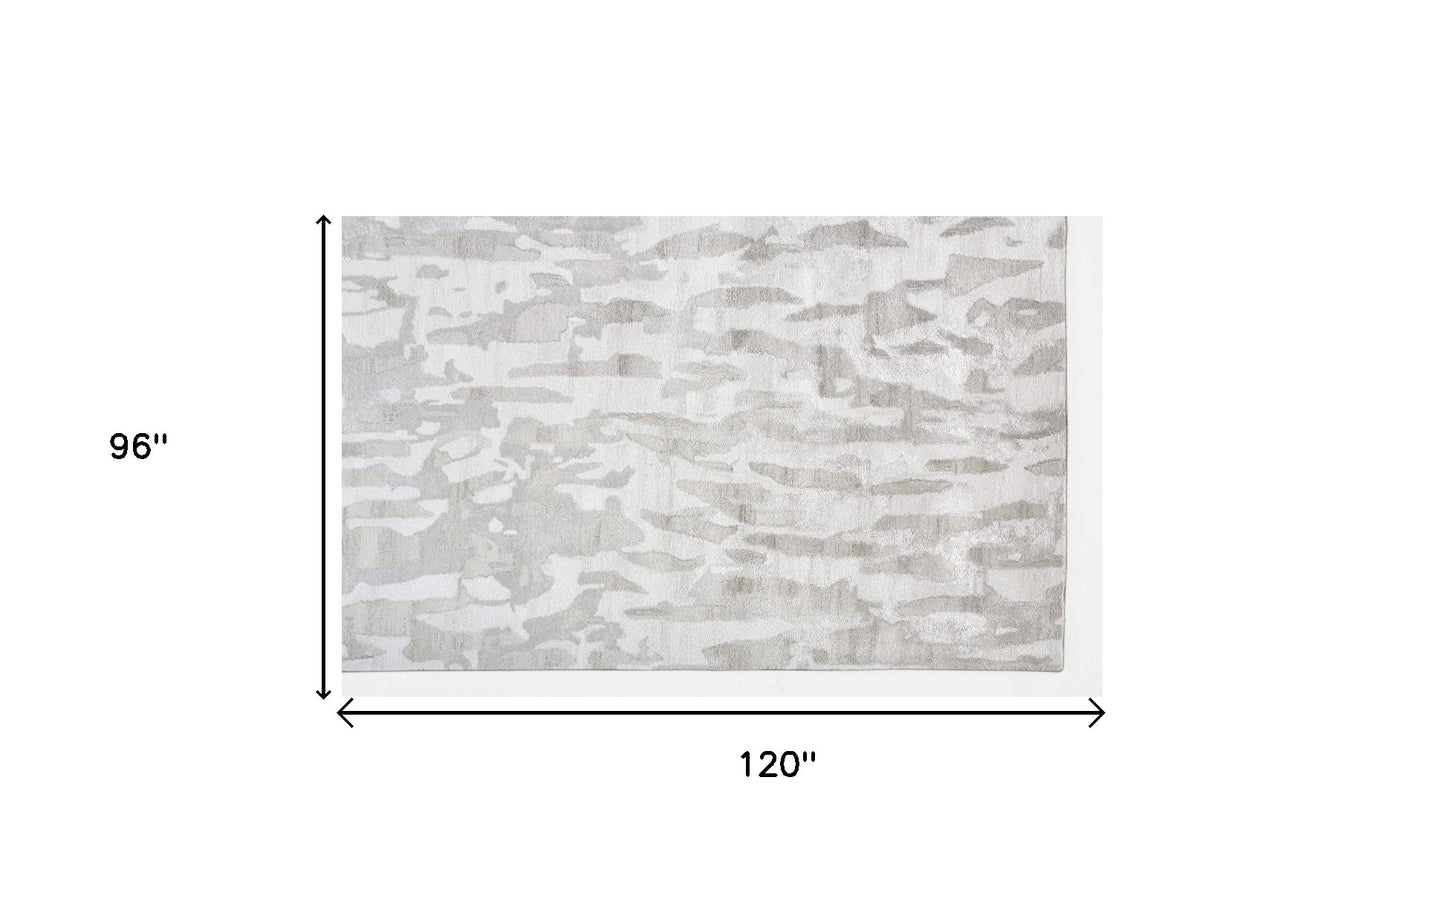 8' X 10' Gray Taupe And Silver Abstract Tufted Handmade Area Rug